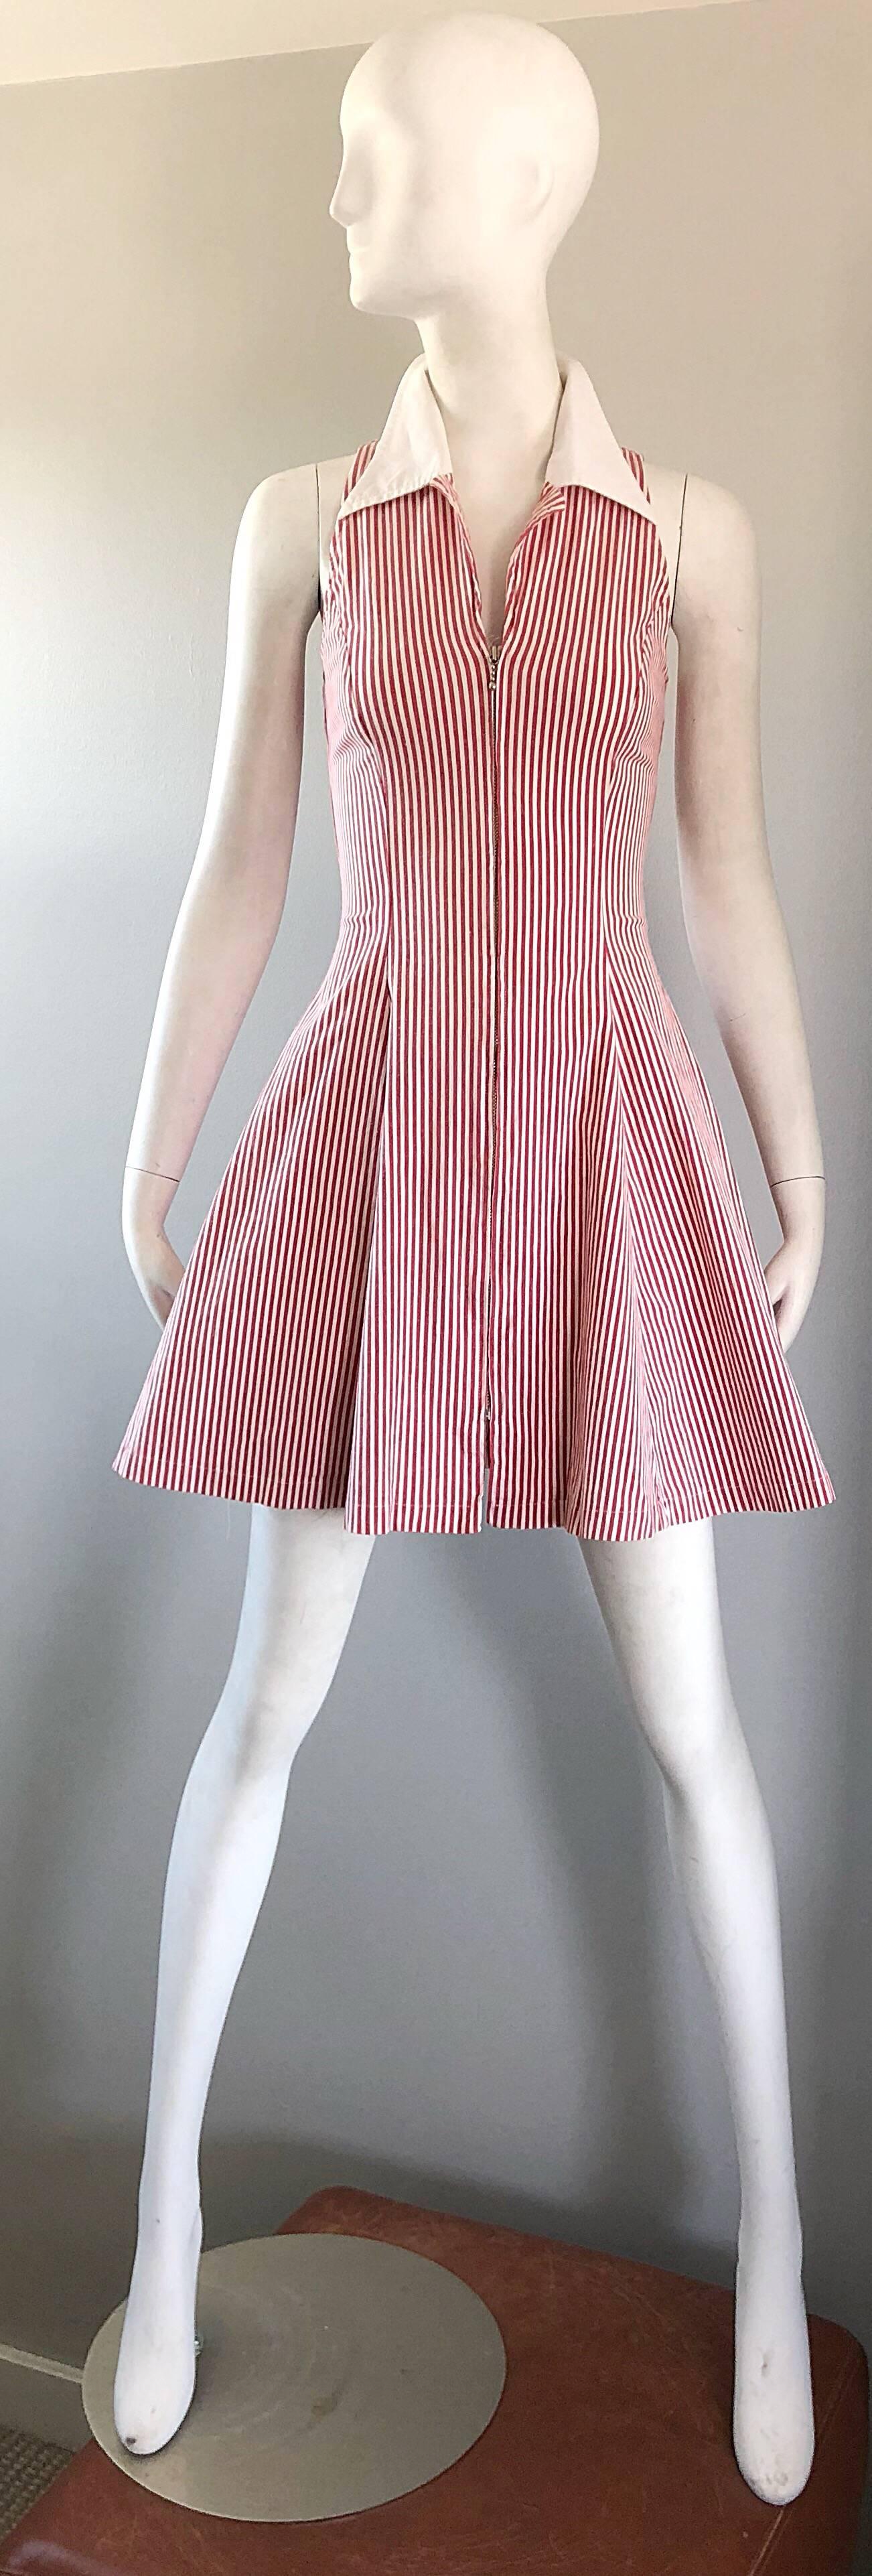 1980s Angelo Tarlazzi Vintage Red and White Seersucker Nautical Striped Dress  For Sale 5